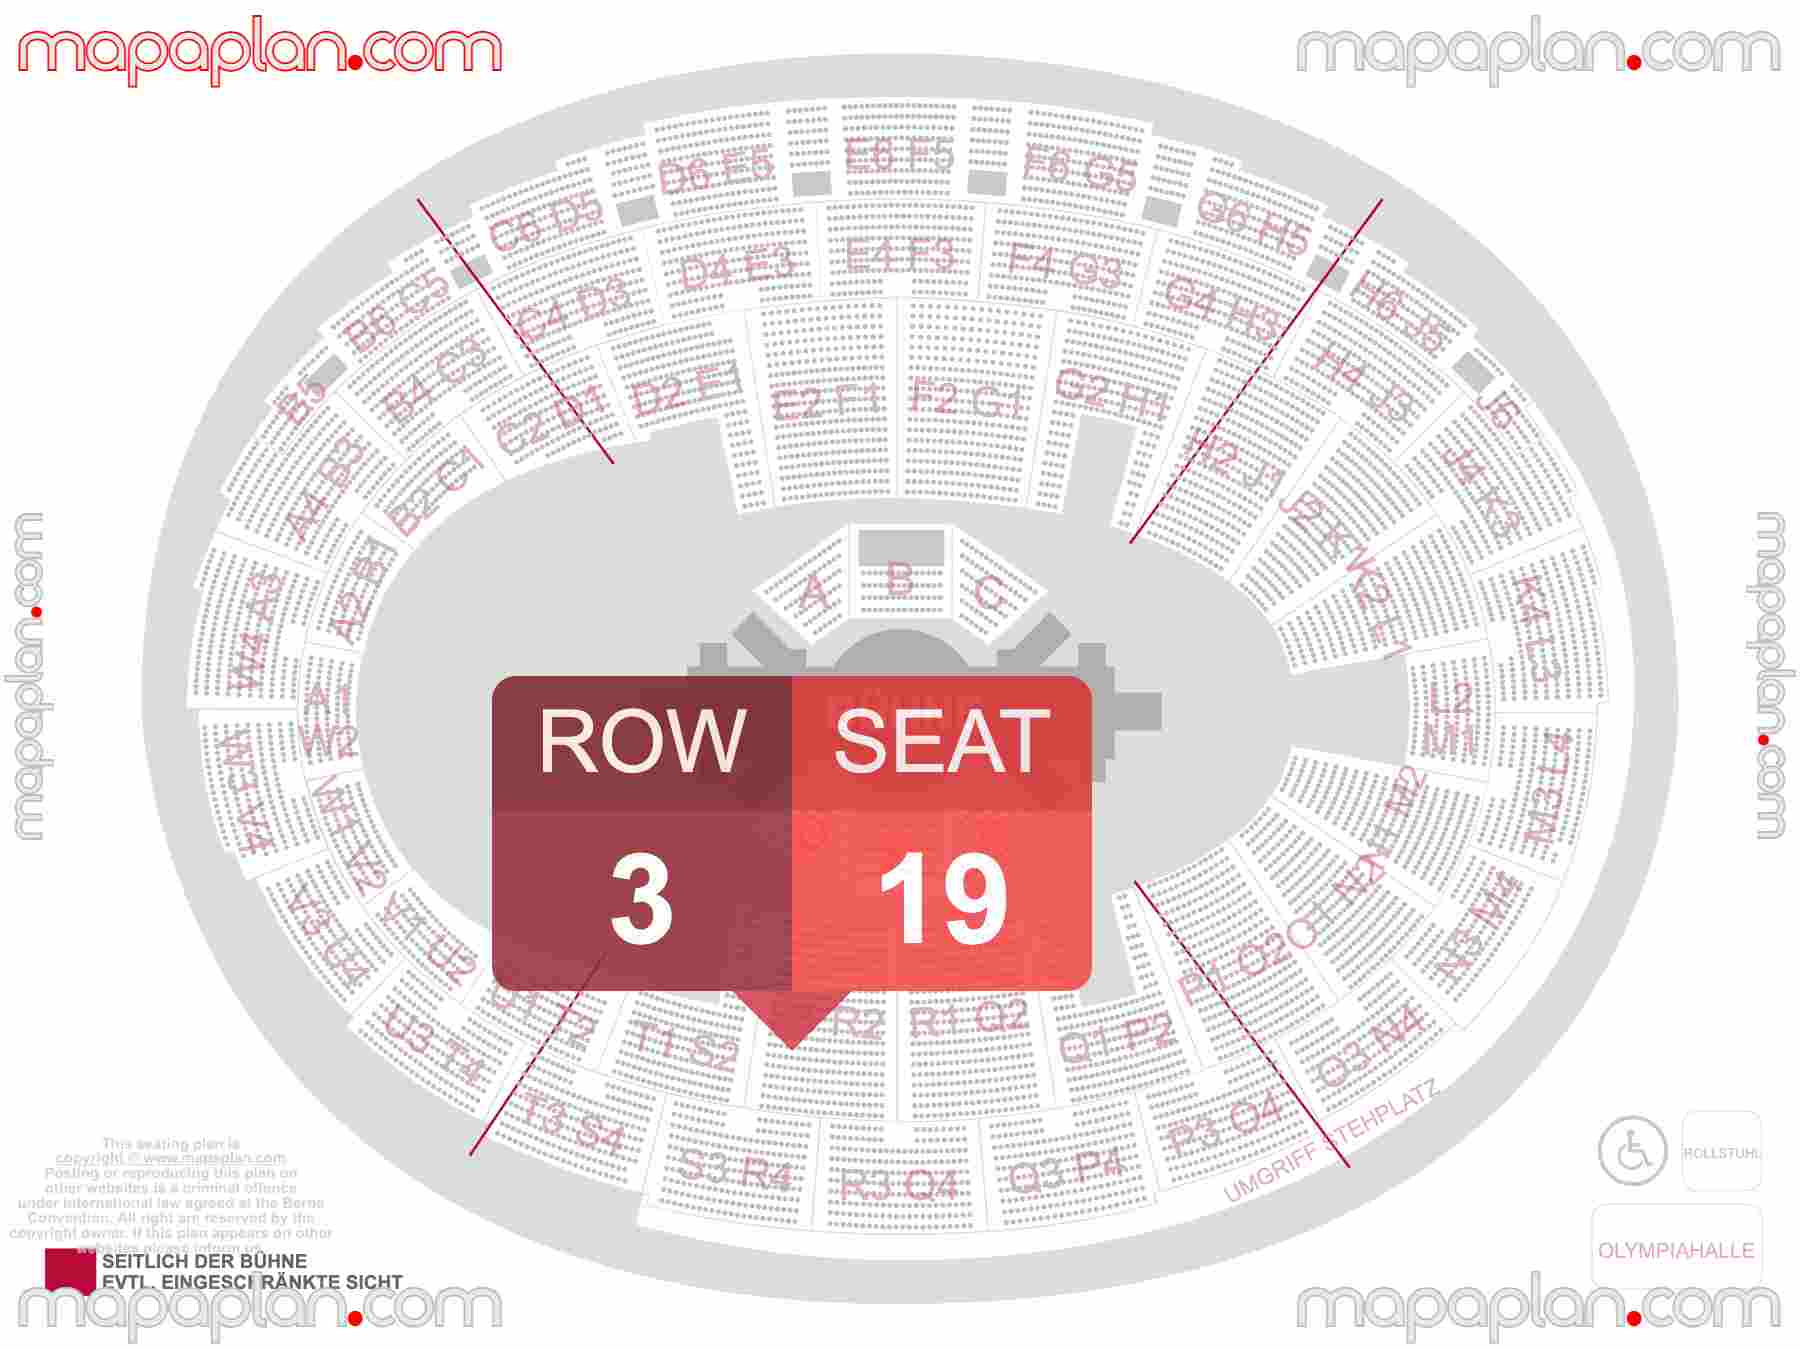 Munich Olympiahalle seating plan Concert 360 in the round stage Konzerte 360 Innenraum Sitzplätze seating plan with exact section numbers showing best rows and seats selection 3d layout - Best interactive seat finder tool with precise detailed location data